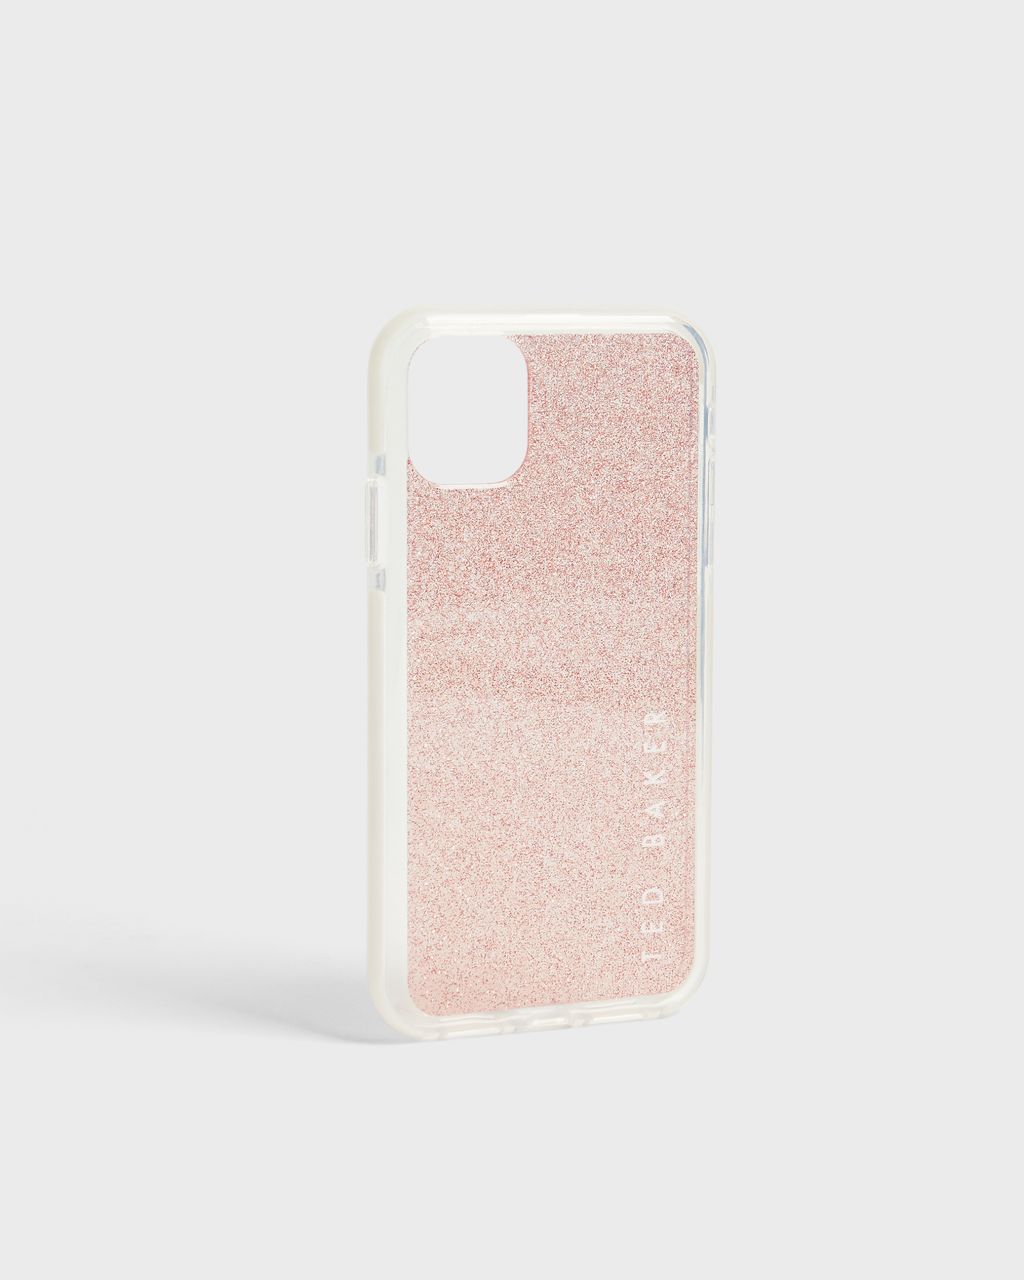 Ted Baker Women's Glitter Antishock Iphone 11 Case in Baby Pink, Roseaa